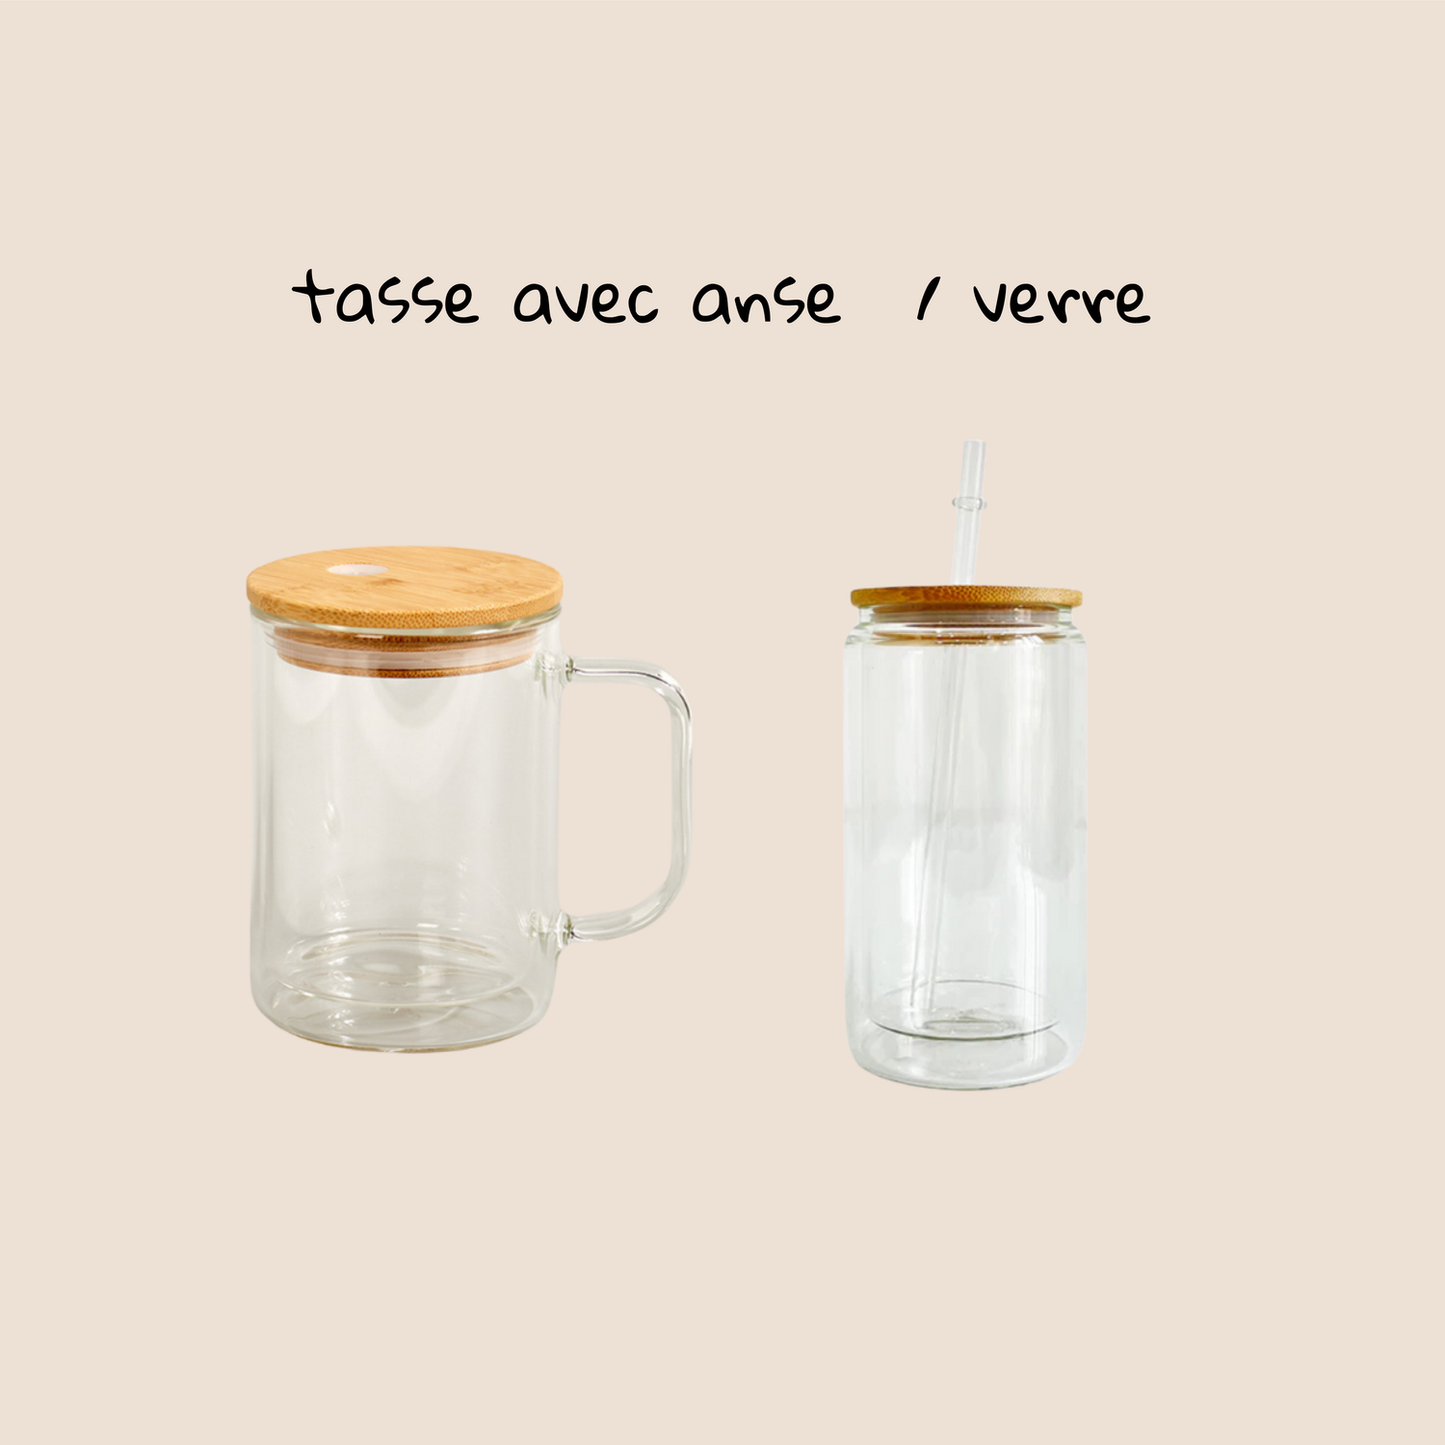 Verre - It’s a good day to have a good day